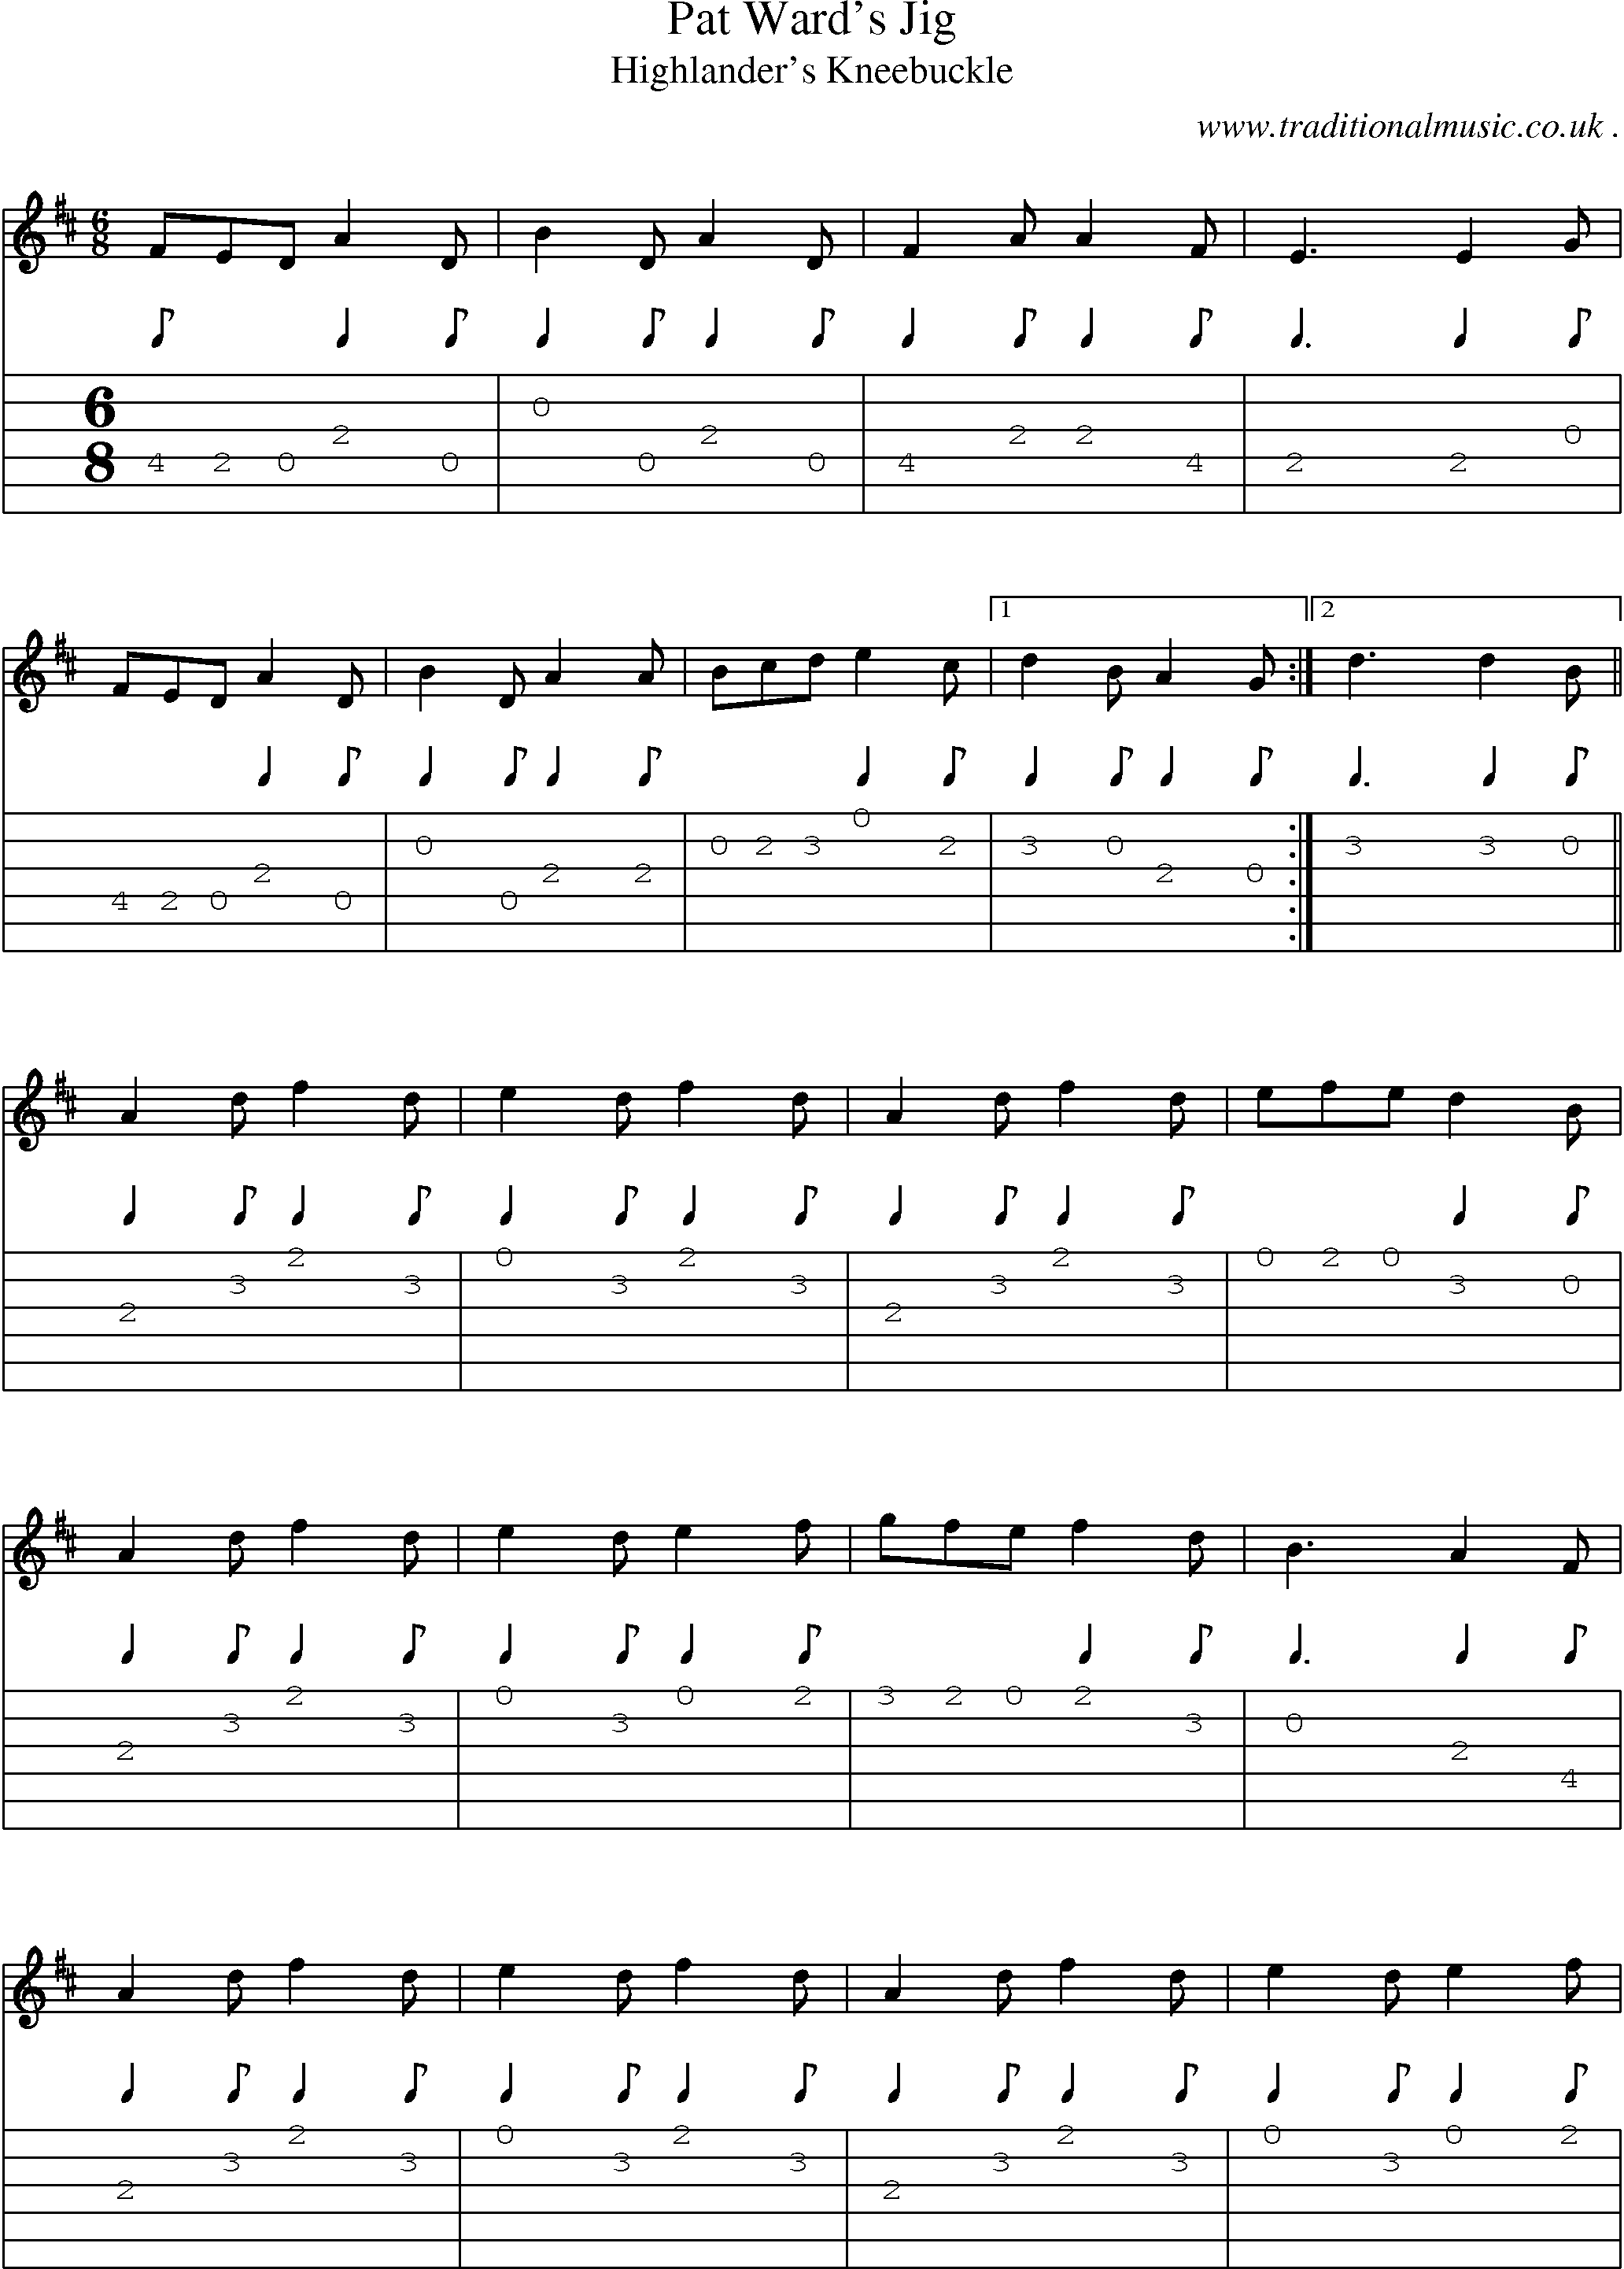 Sheet-Music and Guitar Tabs for Pat Wards Jig